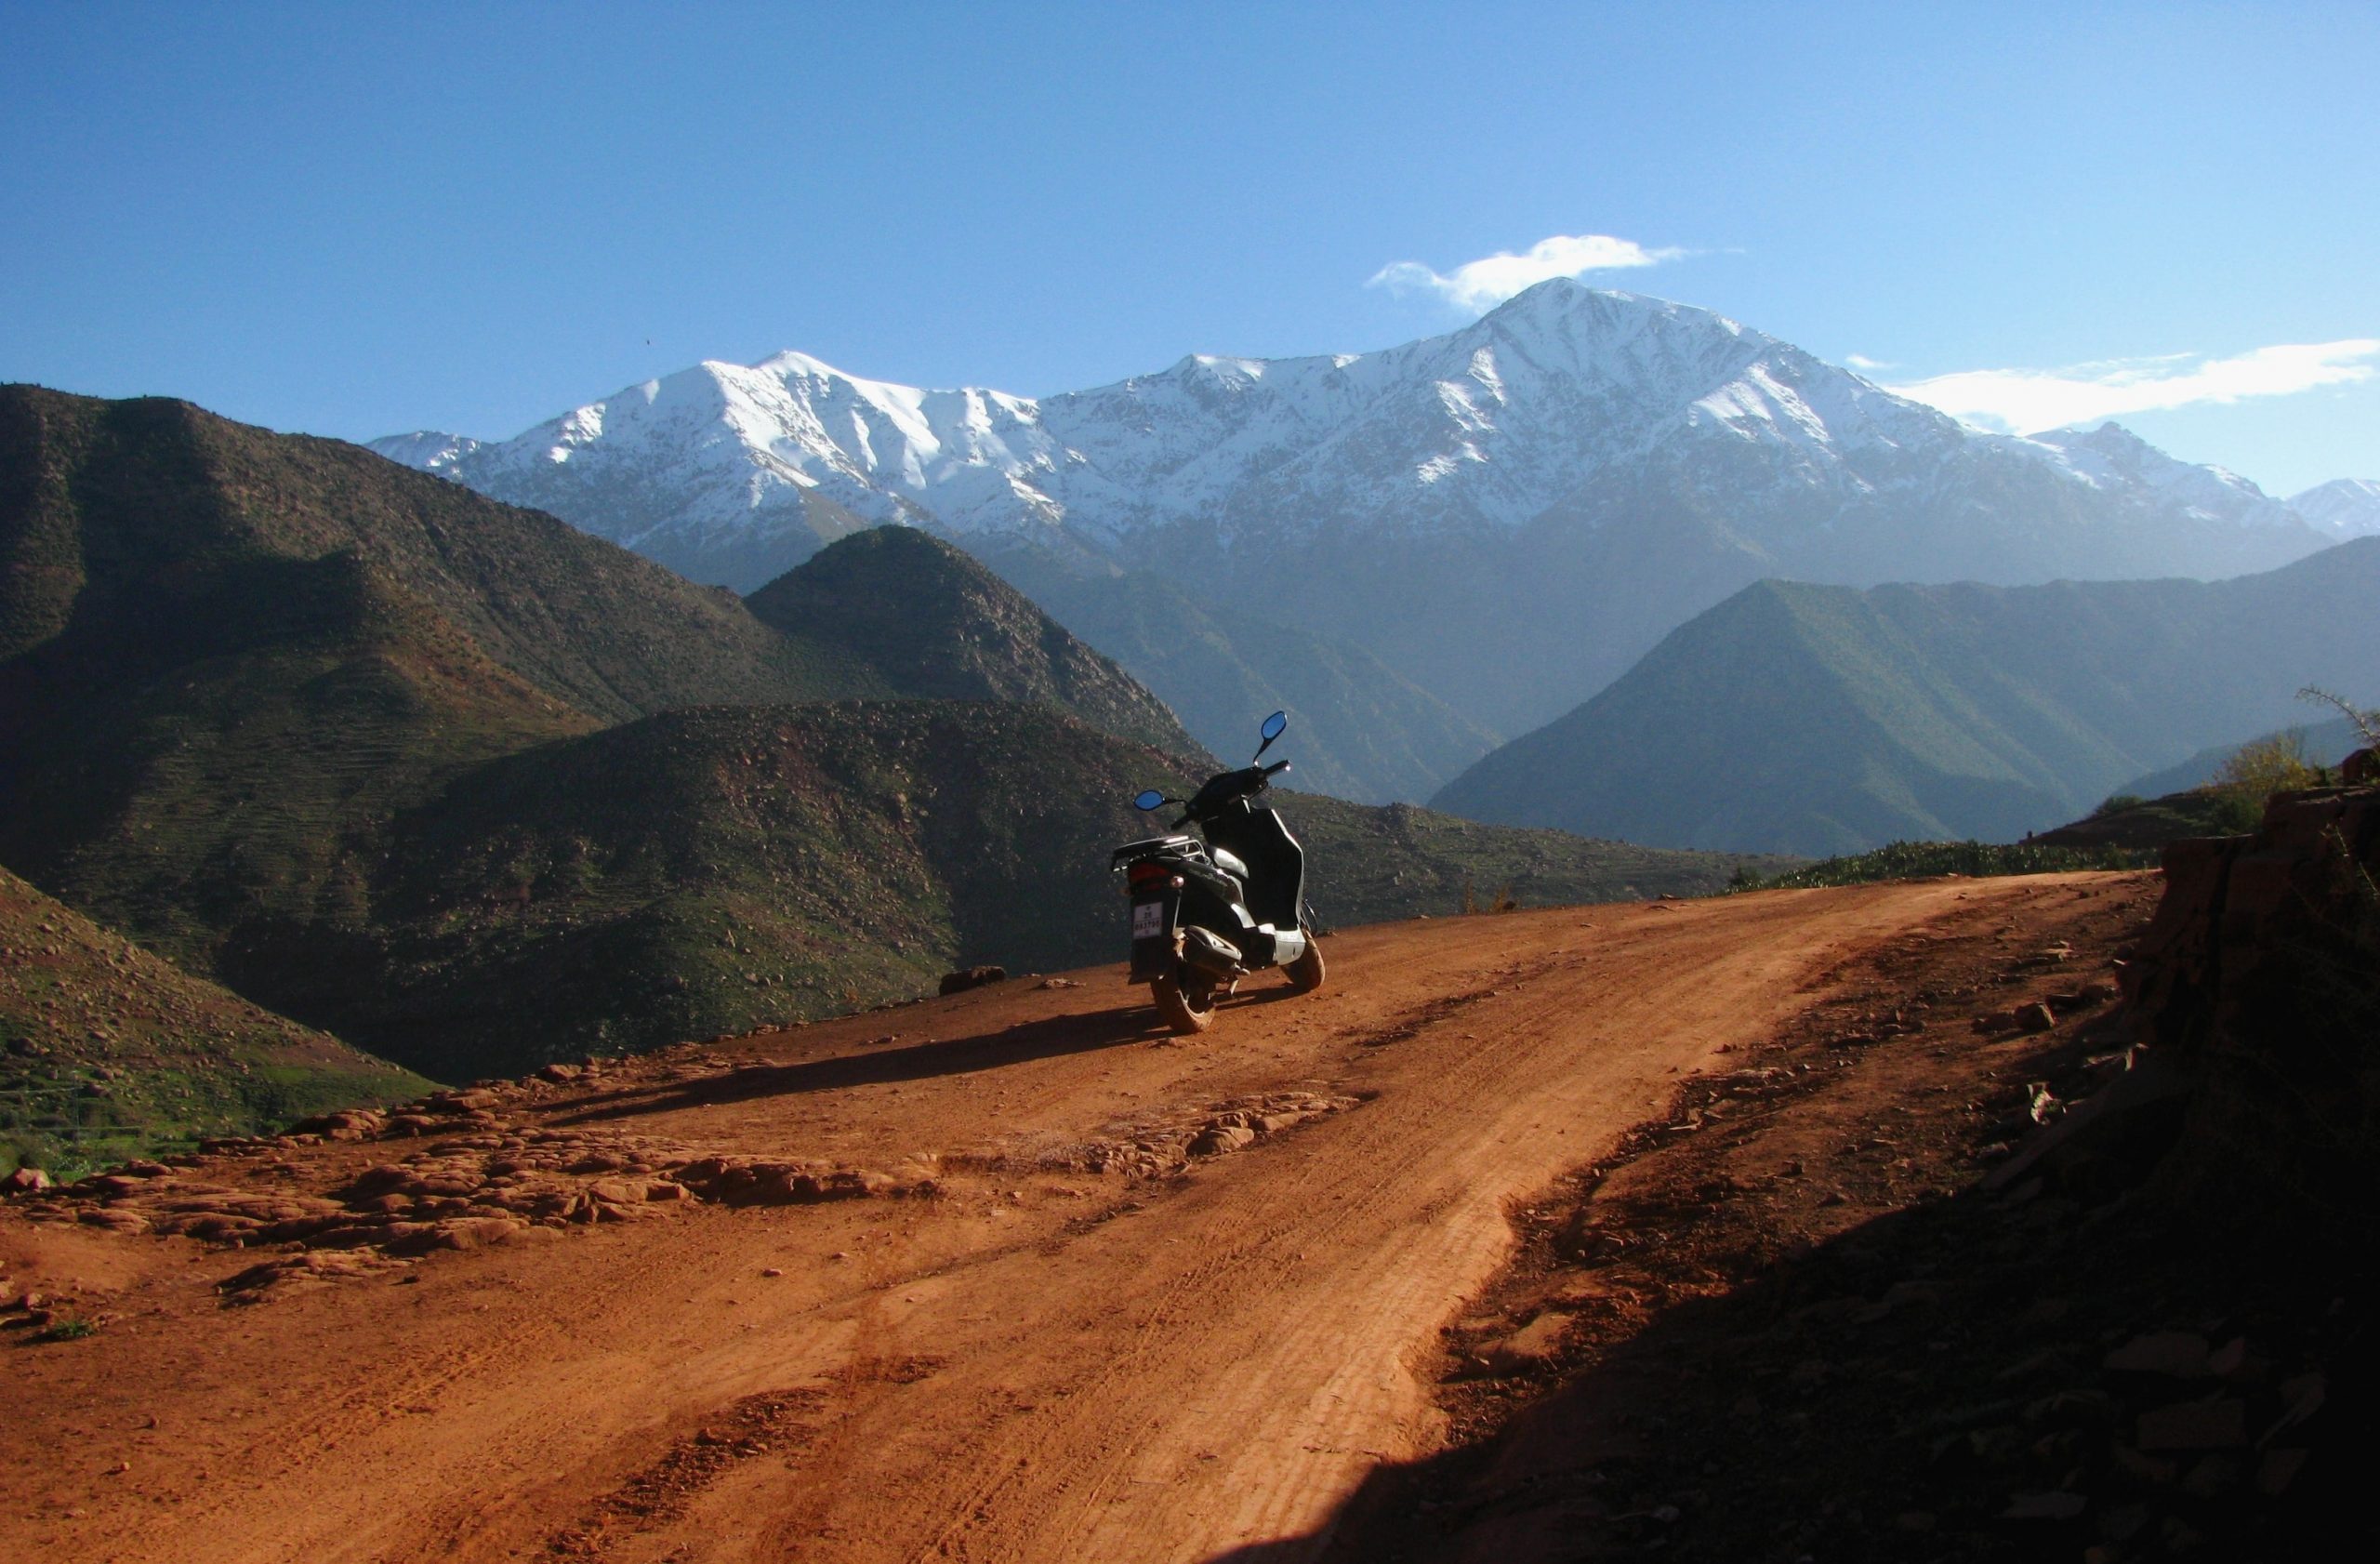 gallery image for 1 Day Atlas Mountains Hike in Imlil From Marrakech